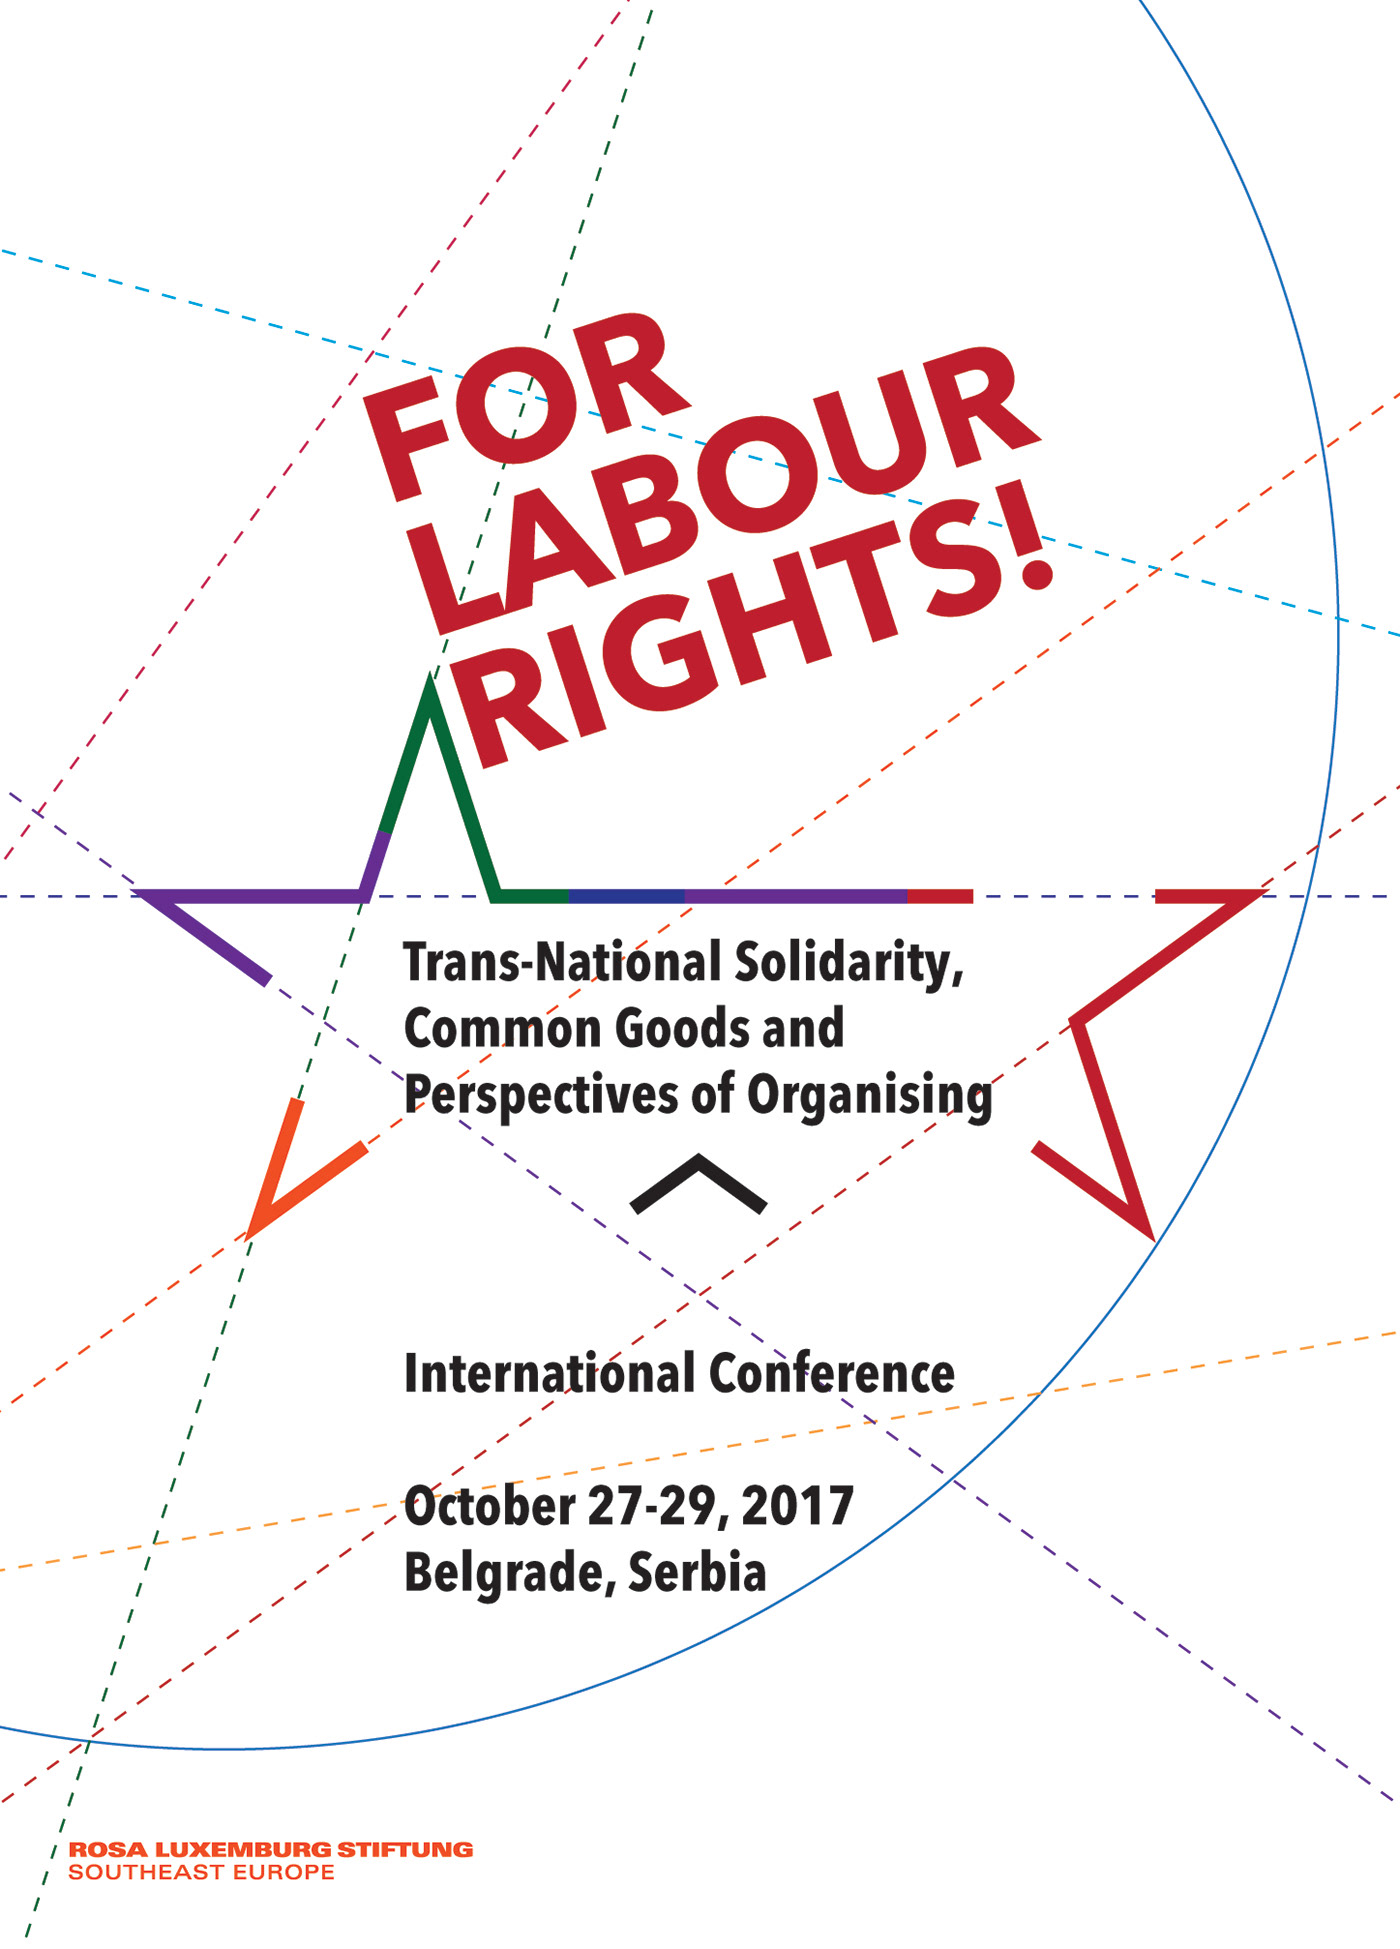 for labour rights trans national solidarity perspectives of organizing